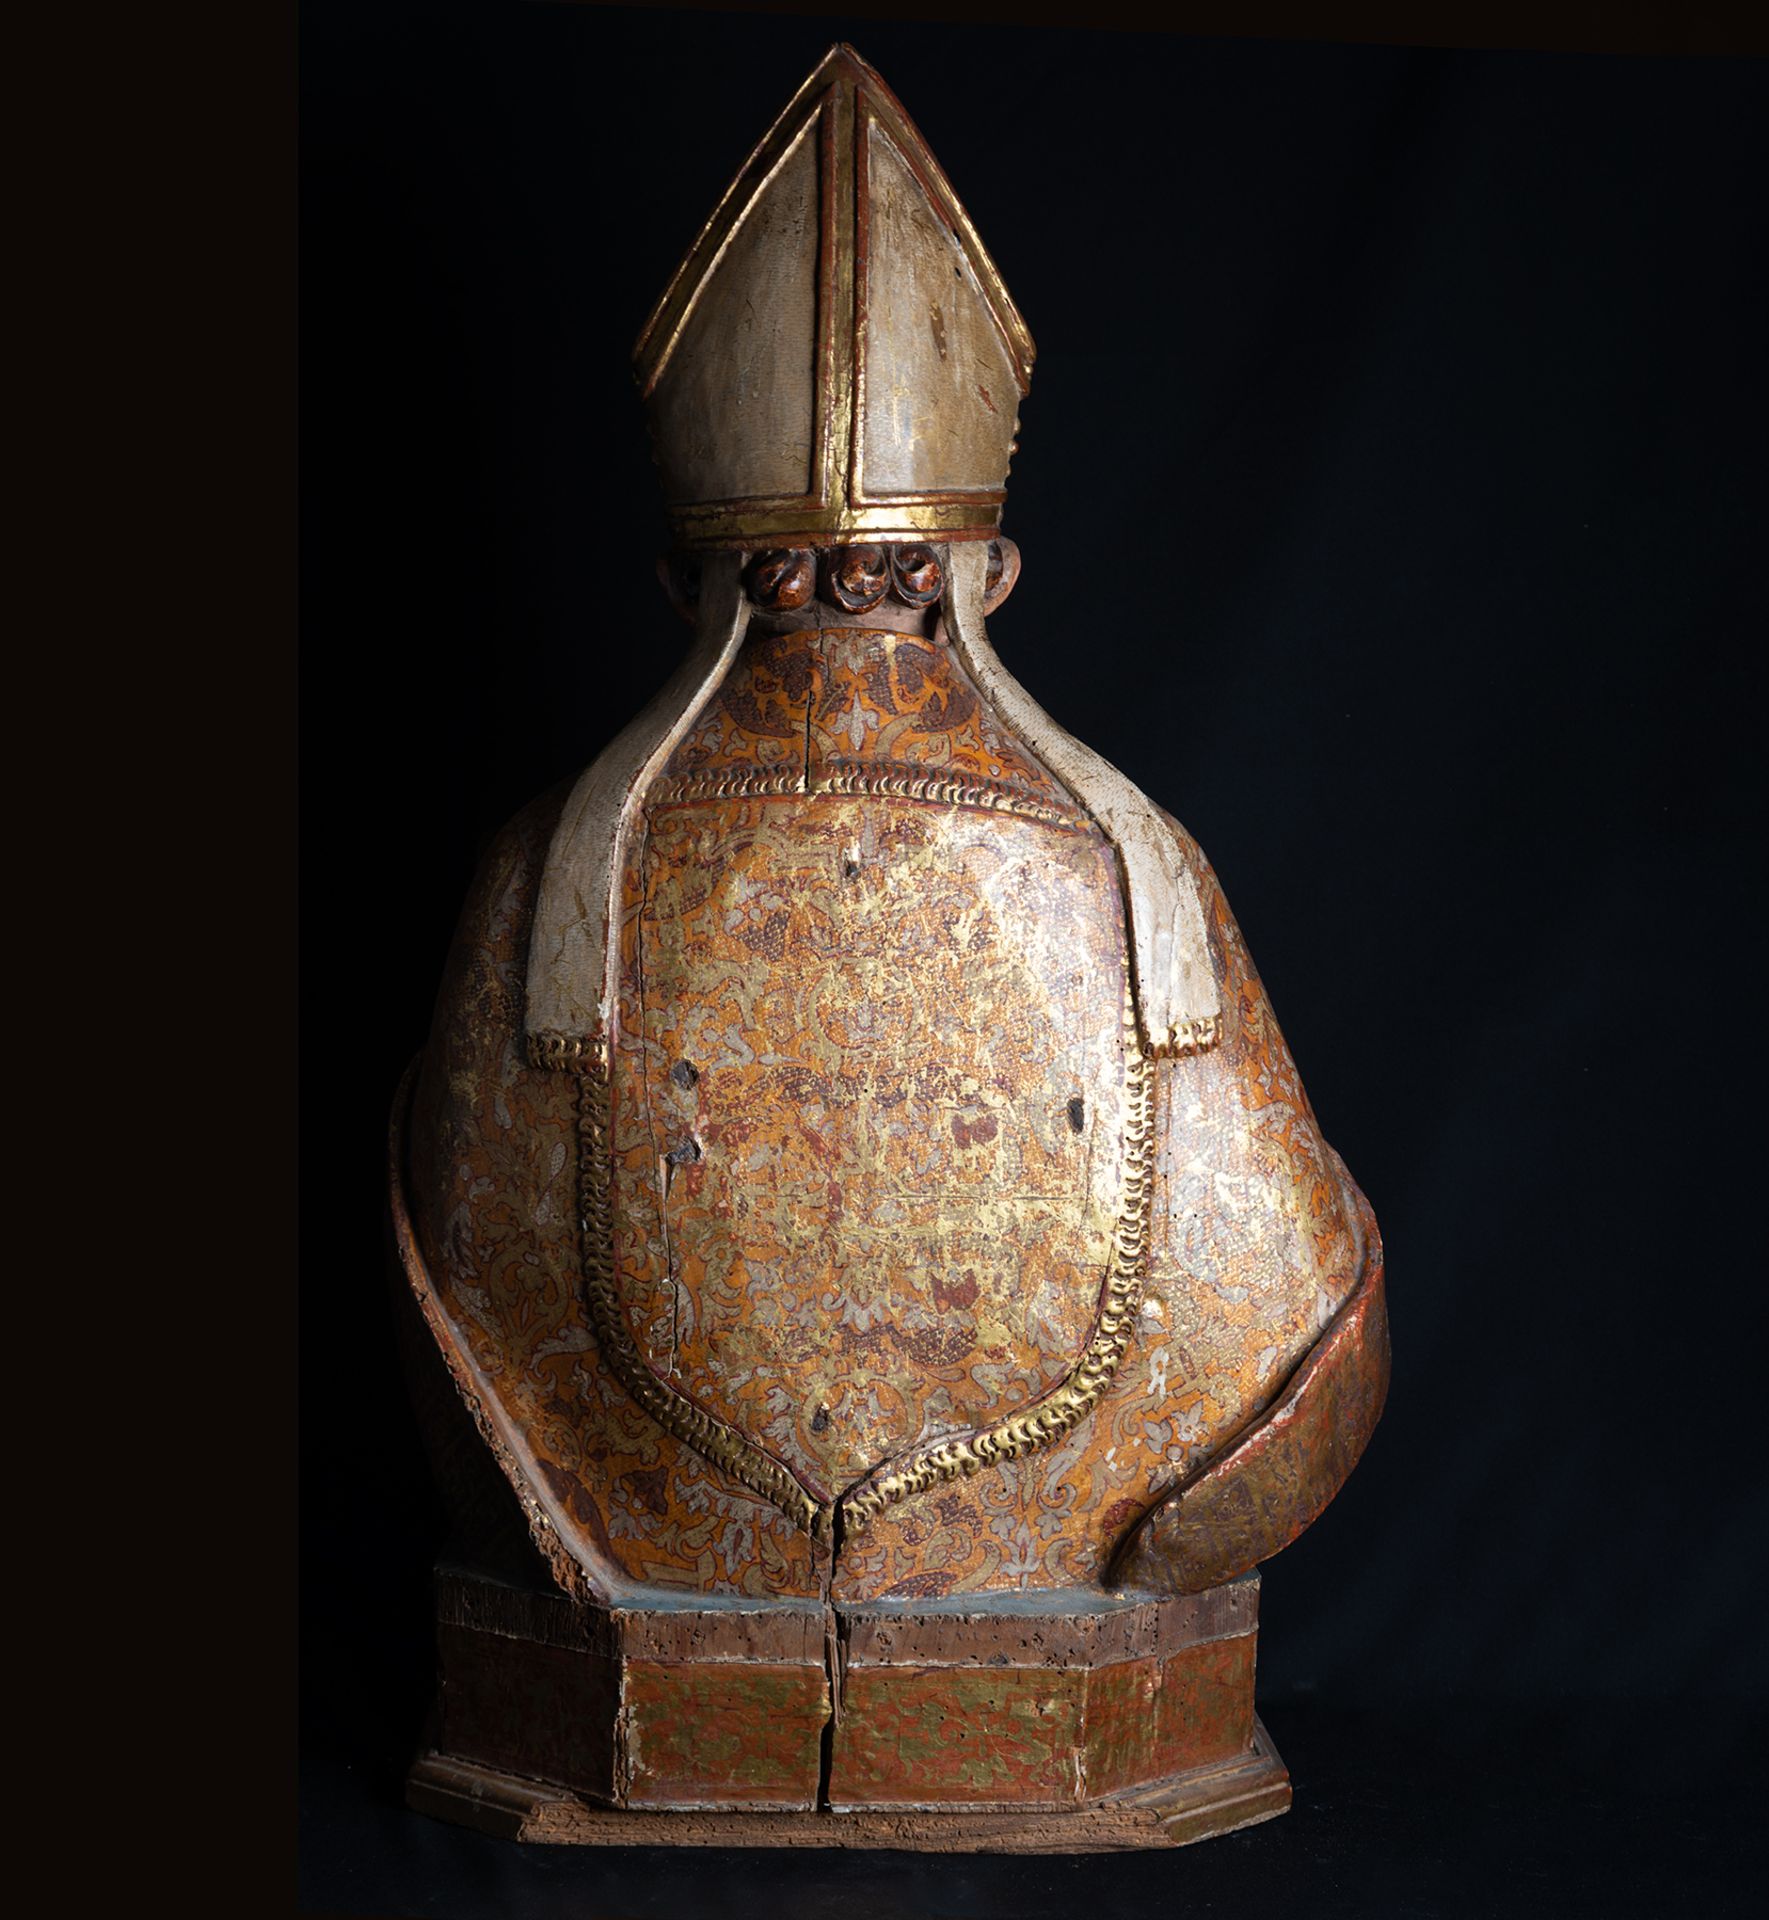 Very Important Life Size Reliquary Bust of Bishop, Spanish Renaissance school of the 16th century - Image 9 of 9